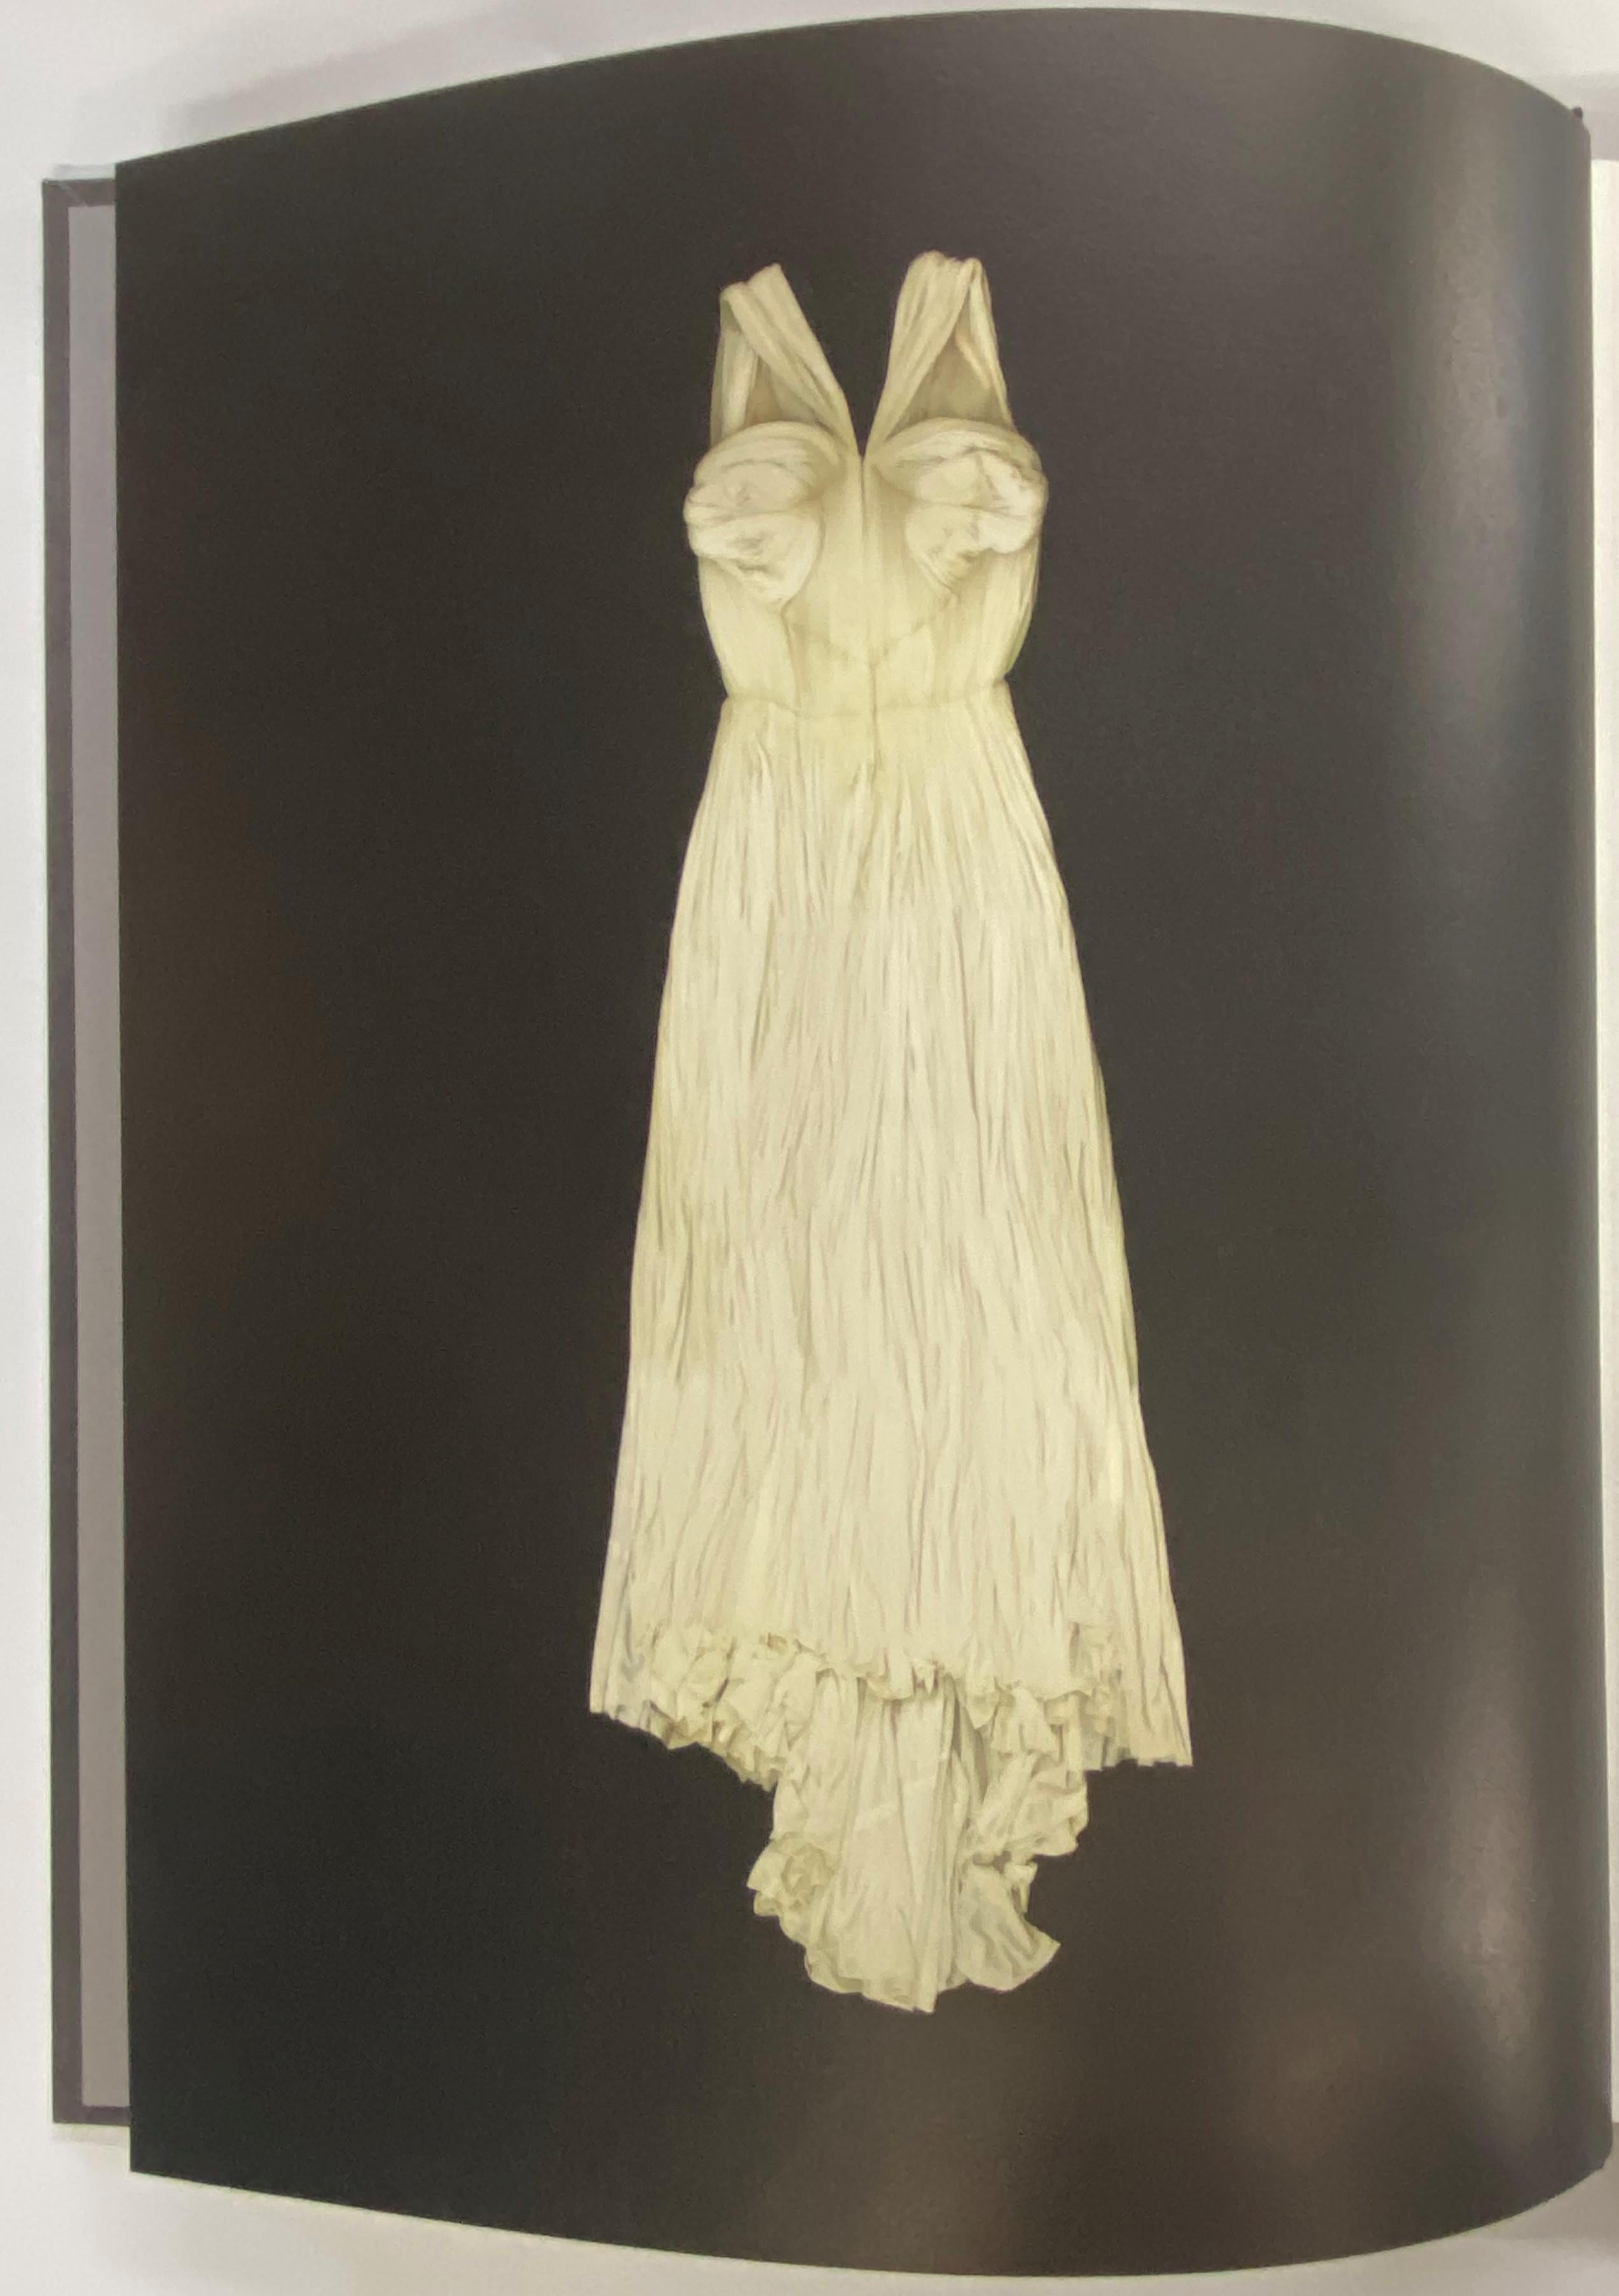 Accompanies an exhibition at the MoMu Fashion Museum, Province of Antwerp from September - February 2013
A remarkable couturier, with a career spanning half a century, Madame Alix Grès (1903-1993) was known for using delicate pleats which turned